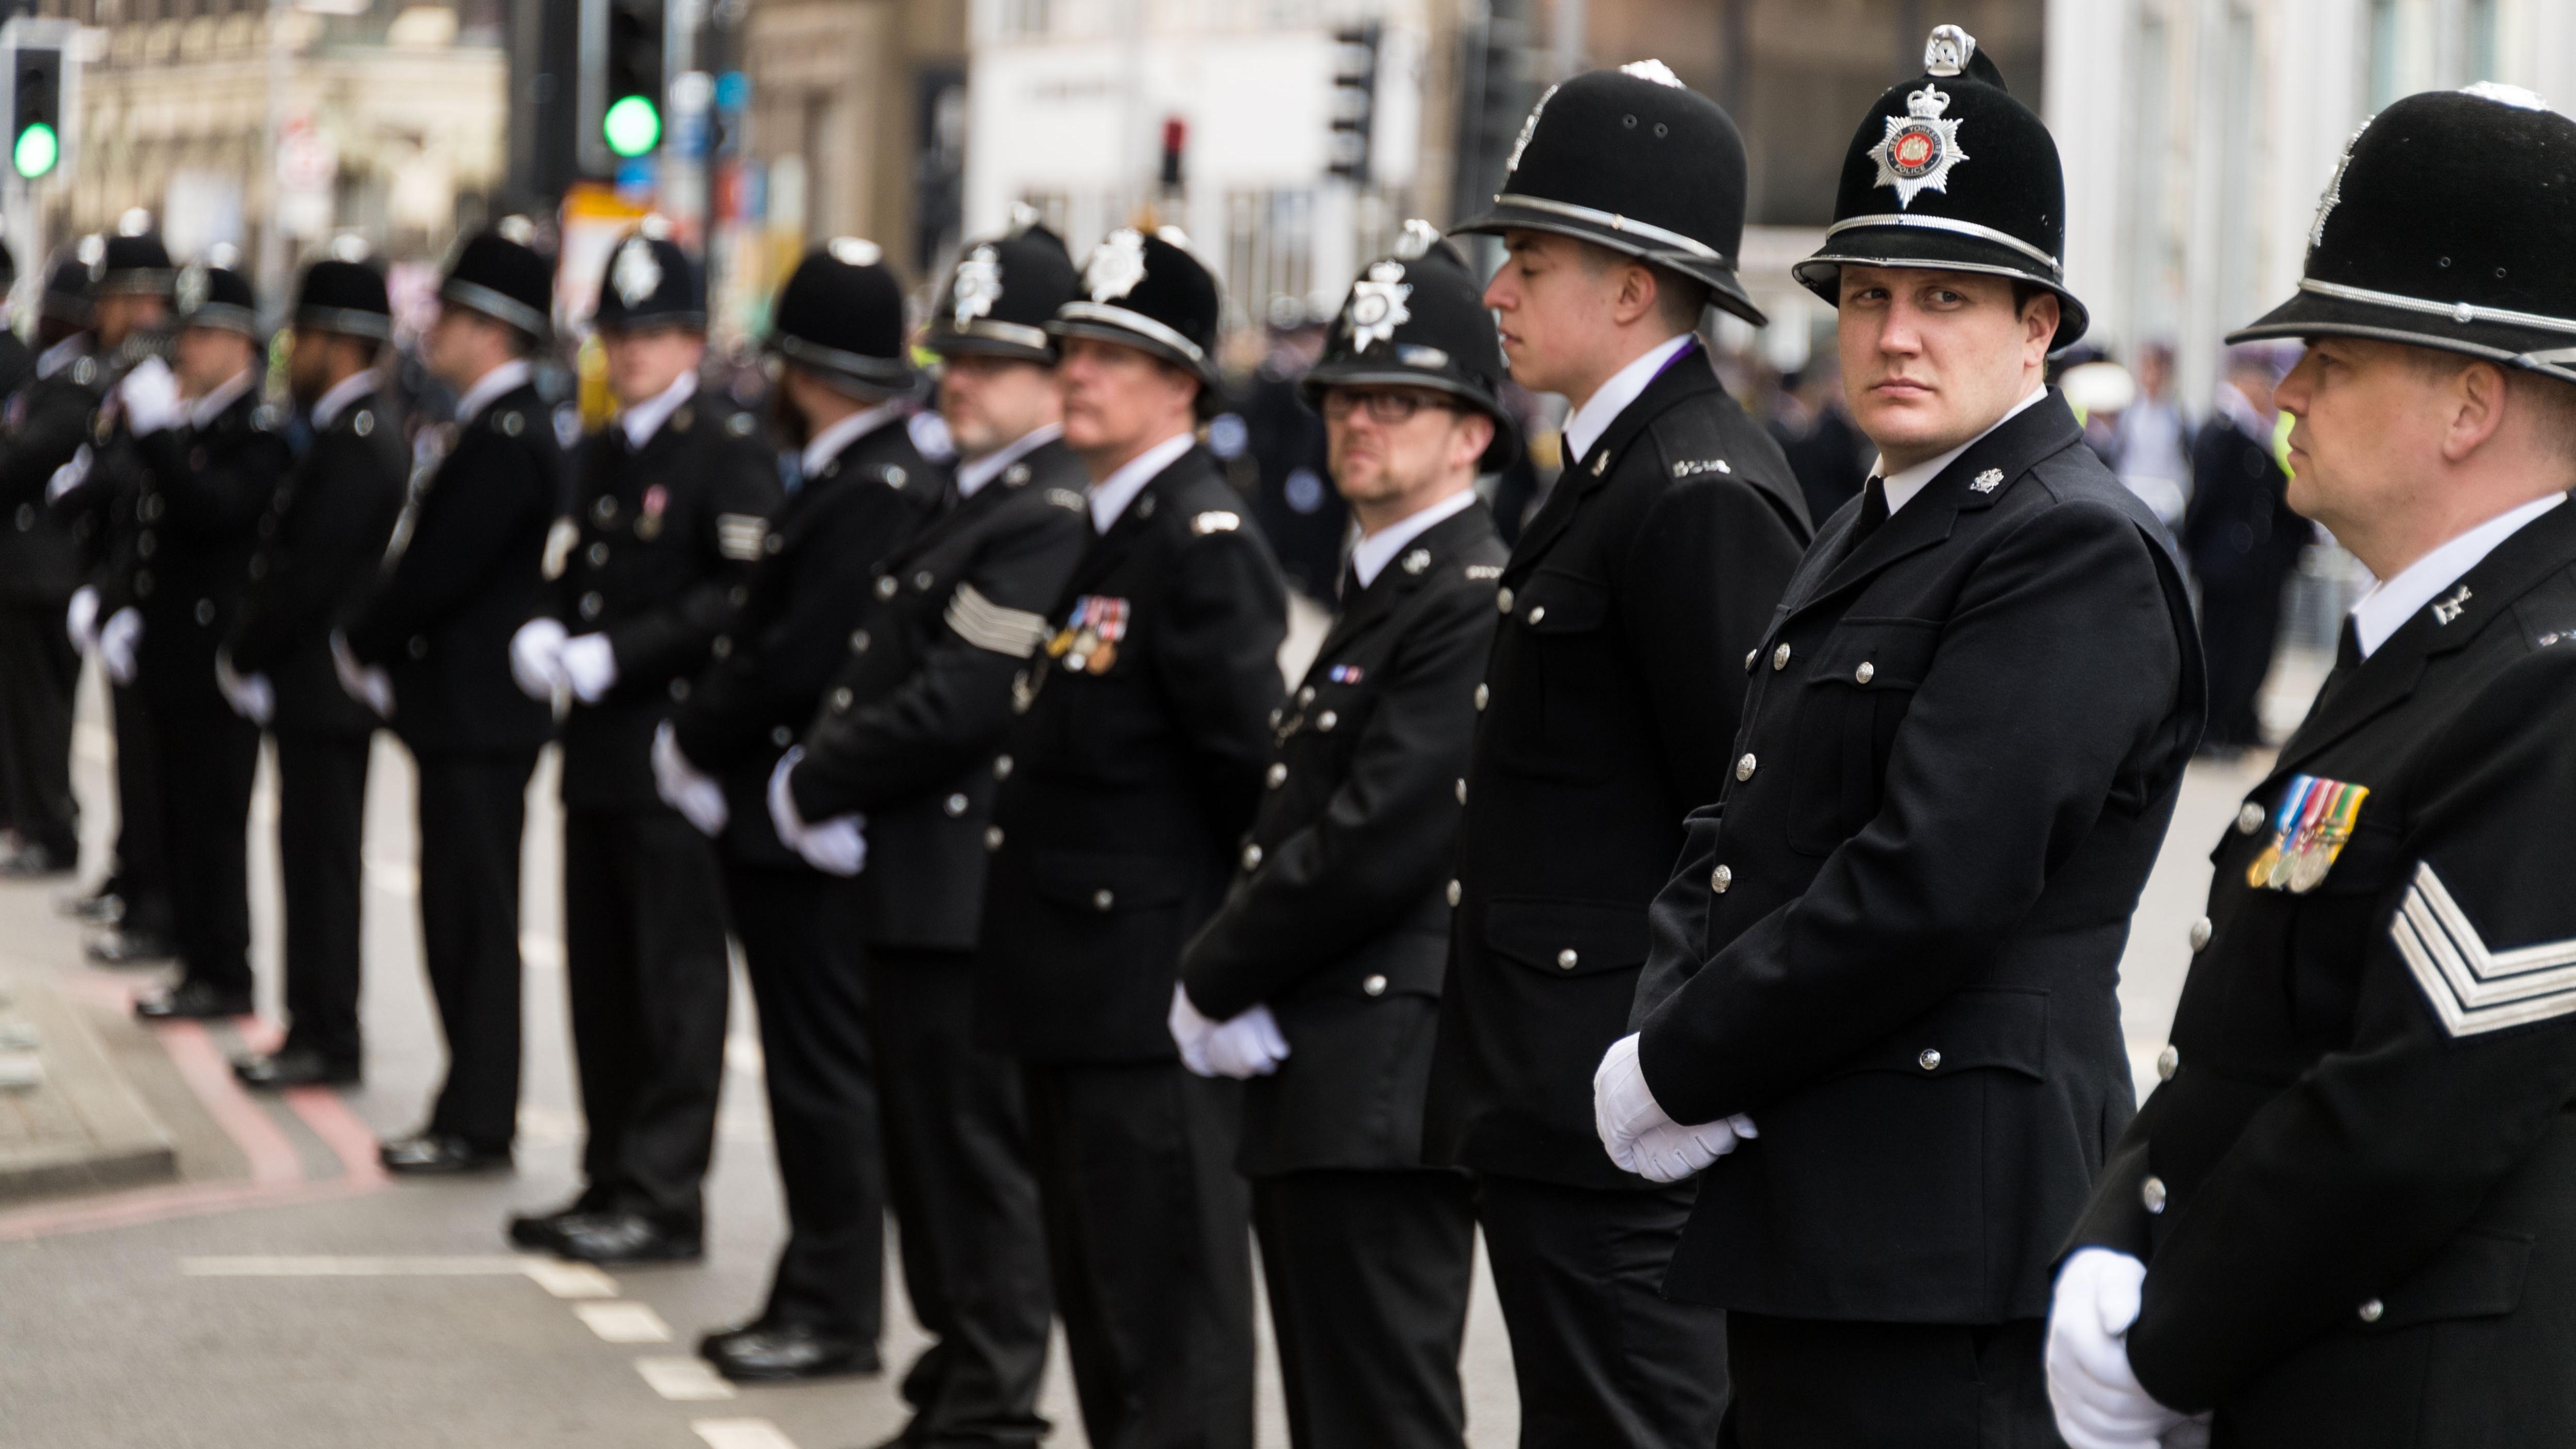 police-officers-uniform-in-the-uk-police-officers-uniform-tax-refund